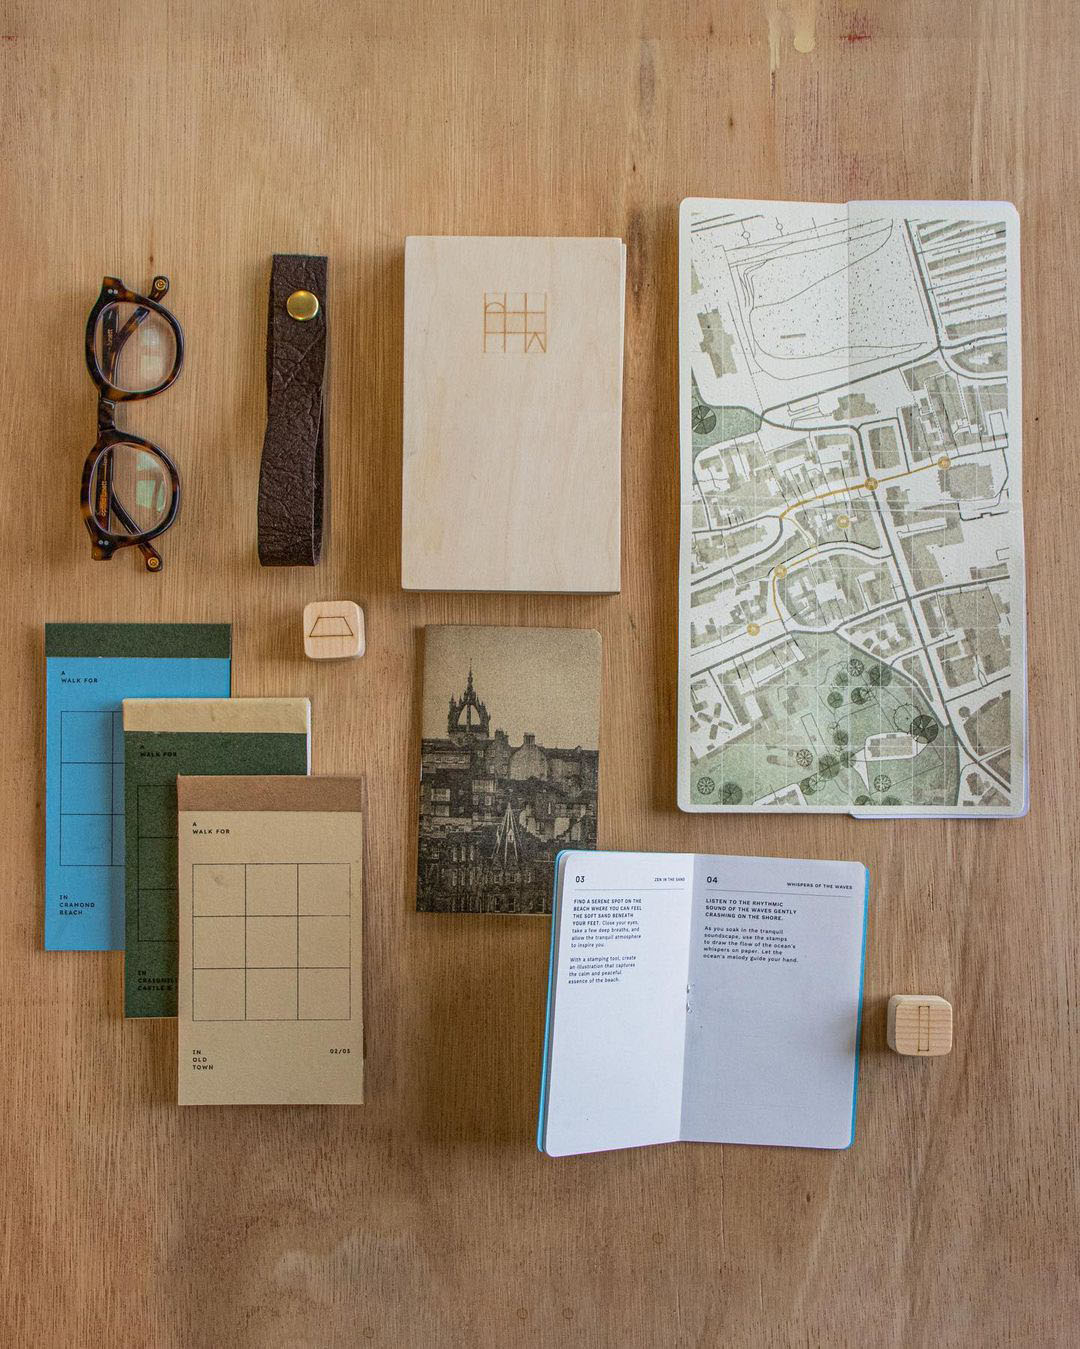 A toolkit that aims to encourage users to explore three aspects of walking in Edinburgh: discovery, exploration, and tranquility. Armed with a set of stamps and a journal, users engage in transformative activities by creating illustrations using the stamps. The process is designed to encourage self-discovery, spark curiosity, and foster inner peace as they connect with the environment during their walk.